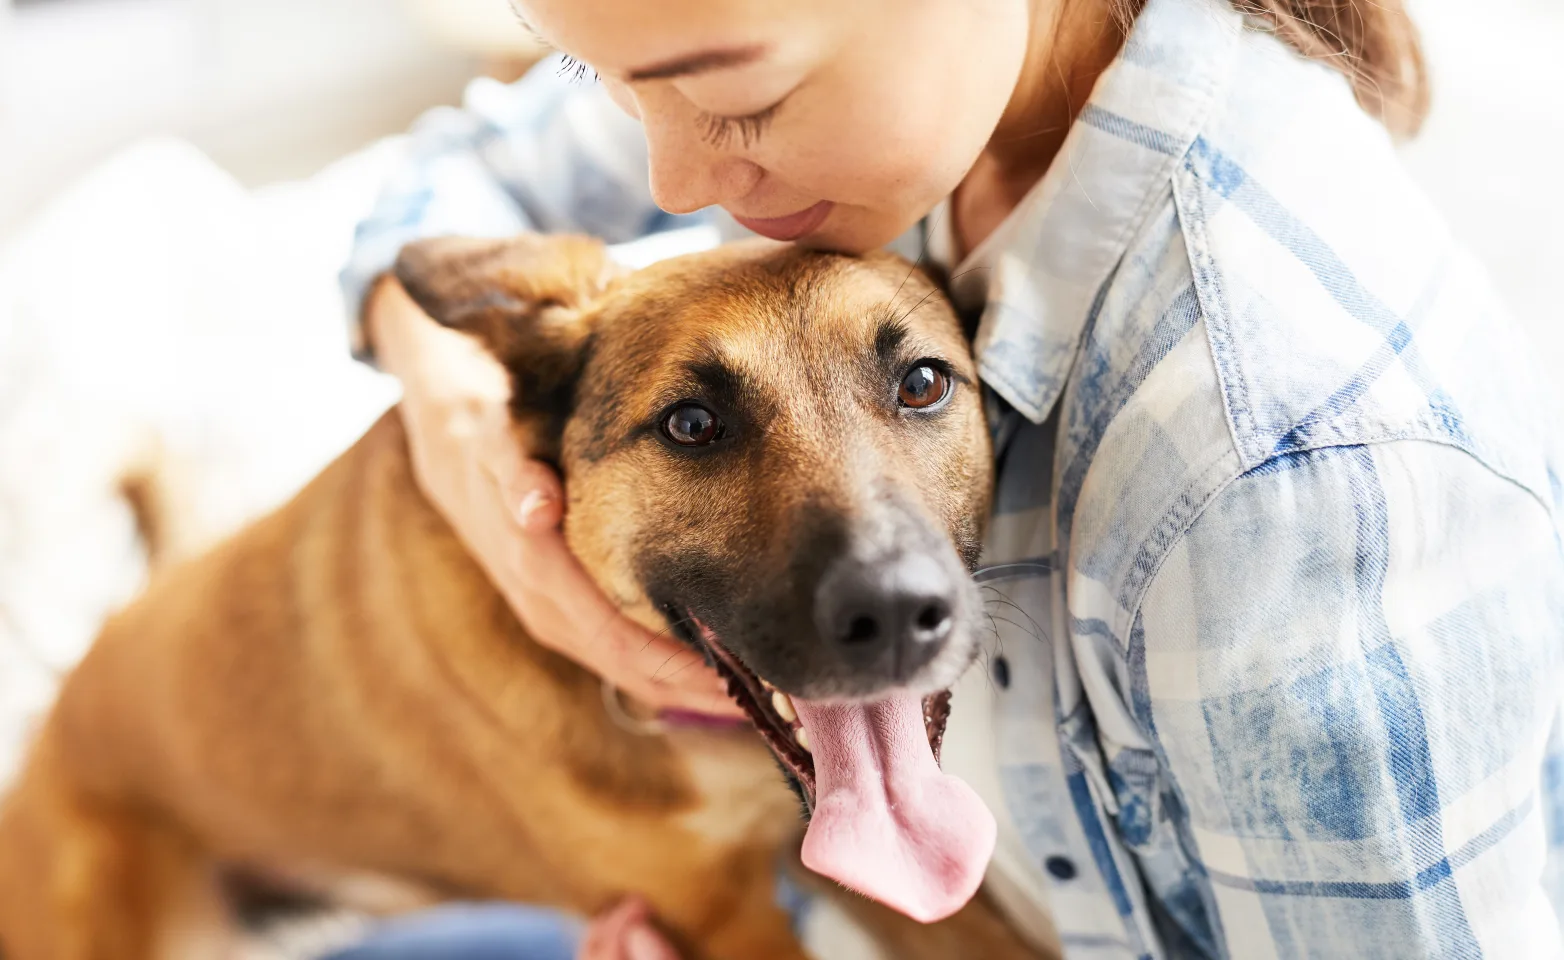 Woman holding dog with its tongue out